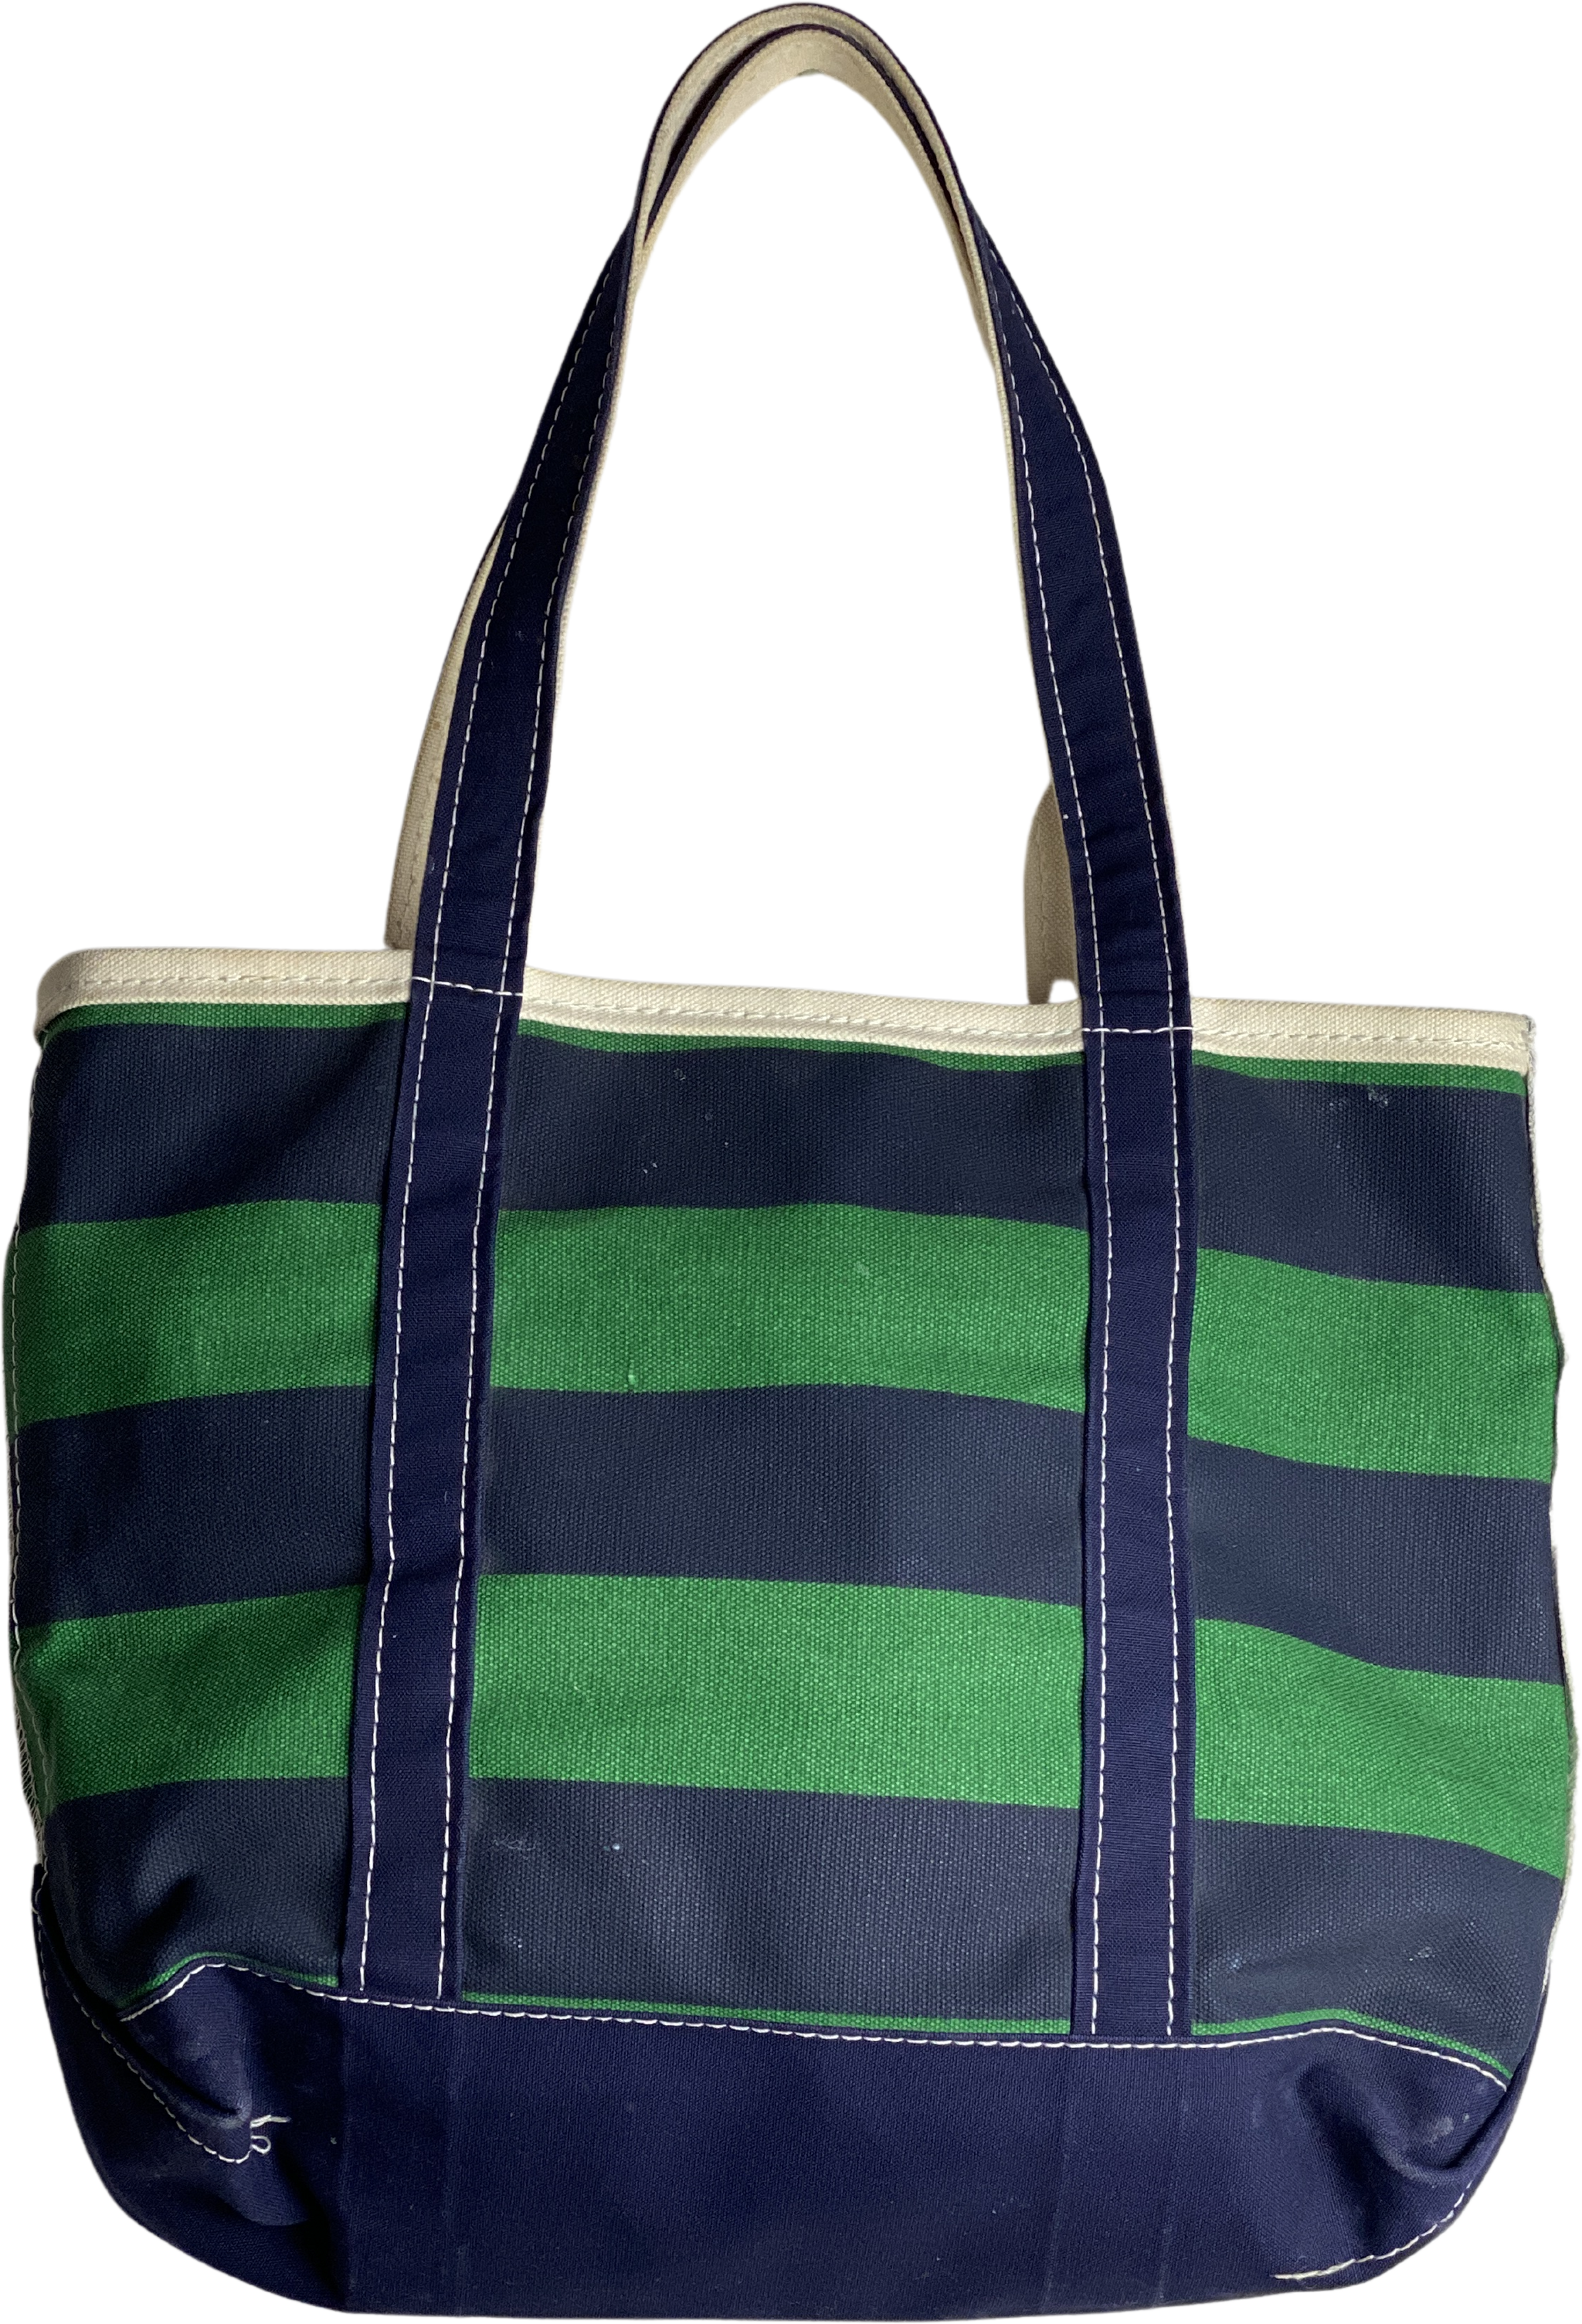 Vintage 80s/90s Navy Blue Green Striped Boat And Tote Bag By L.L.